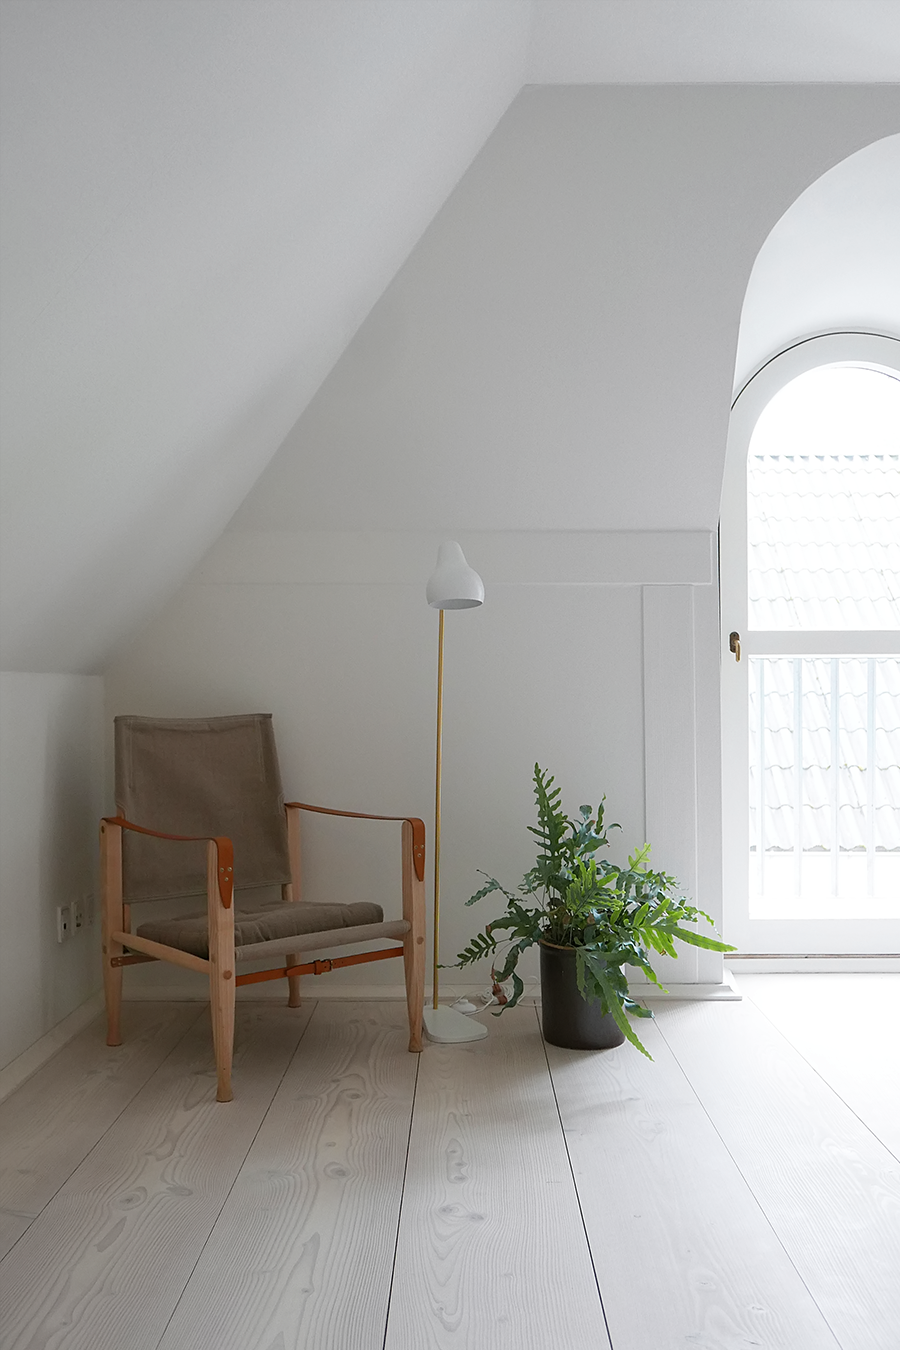 AT THE DINESEN COUNTRY HOME